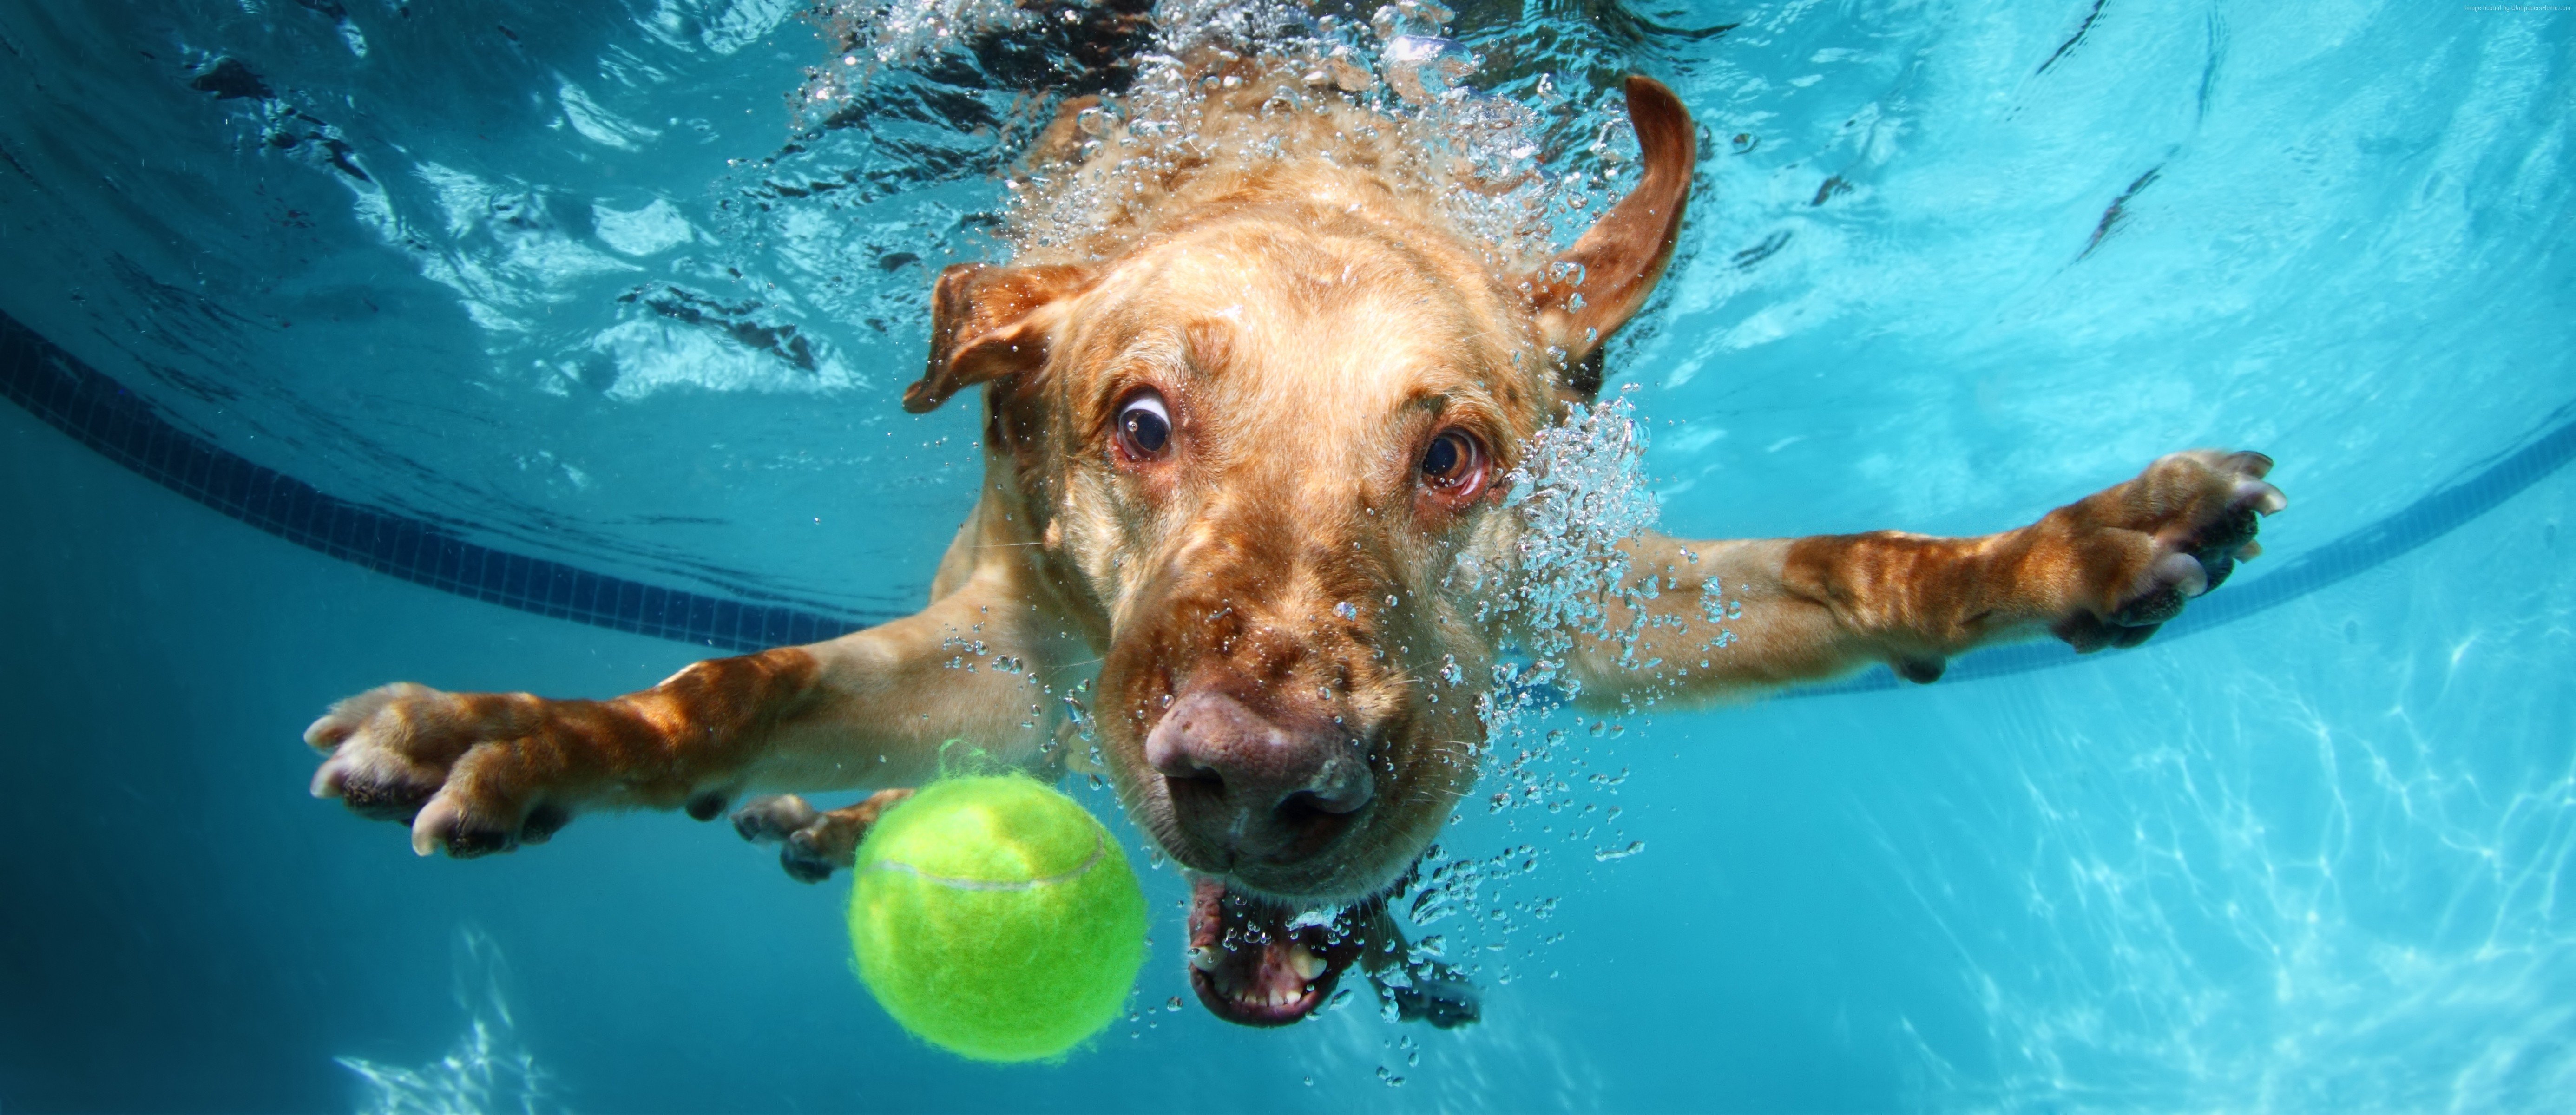 Funny Underwater Dog Wallpapers Fine HDQ Funny Underwater